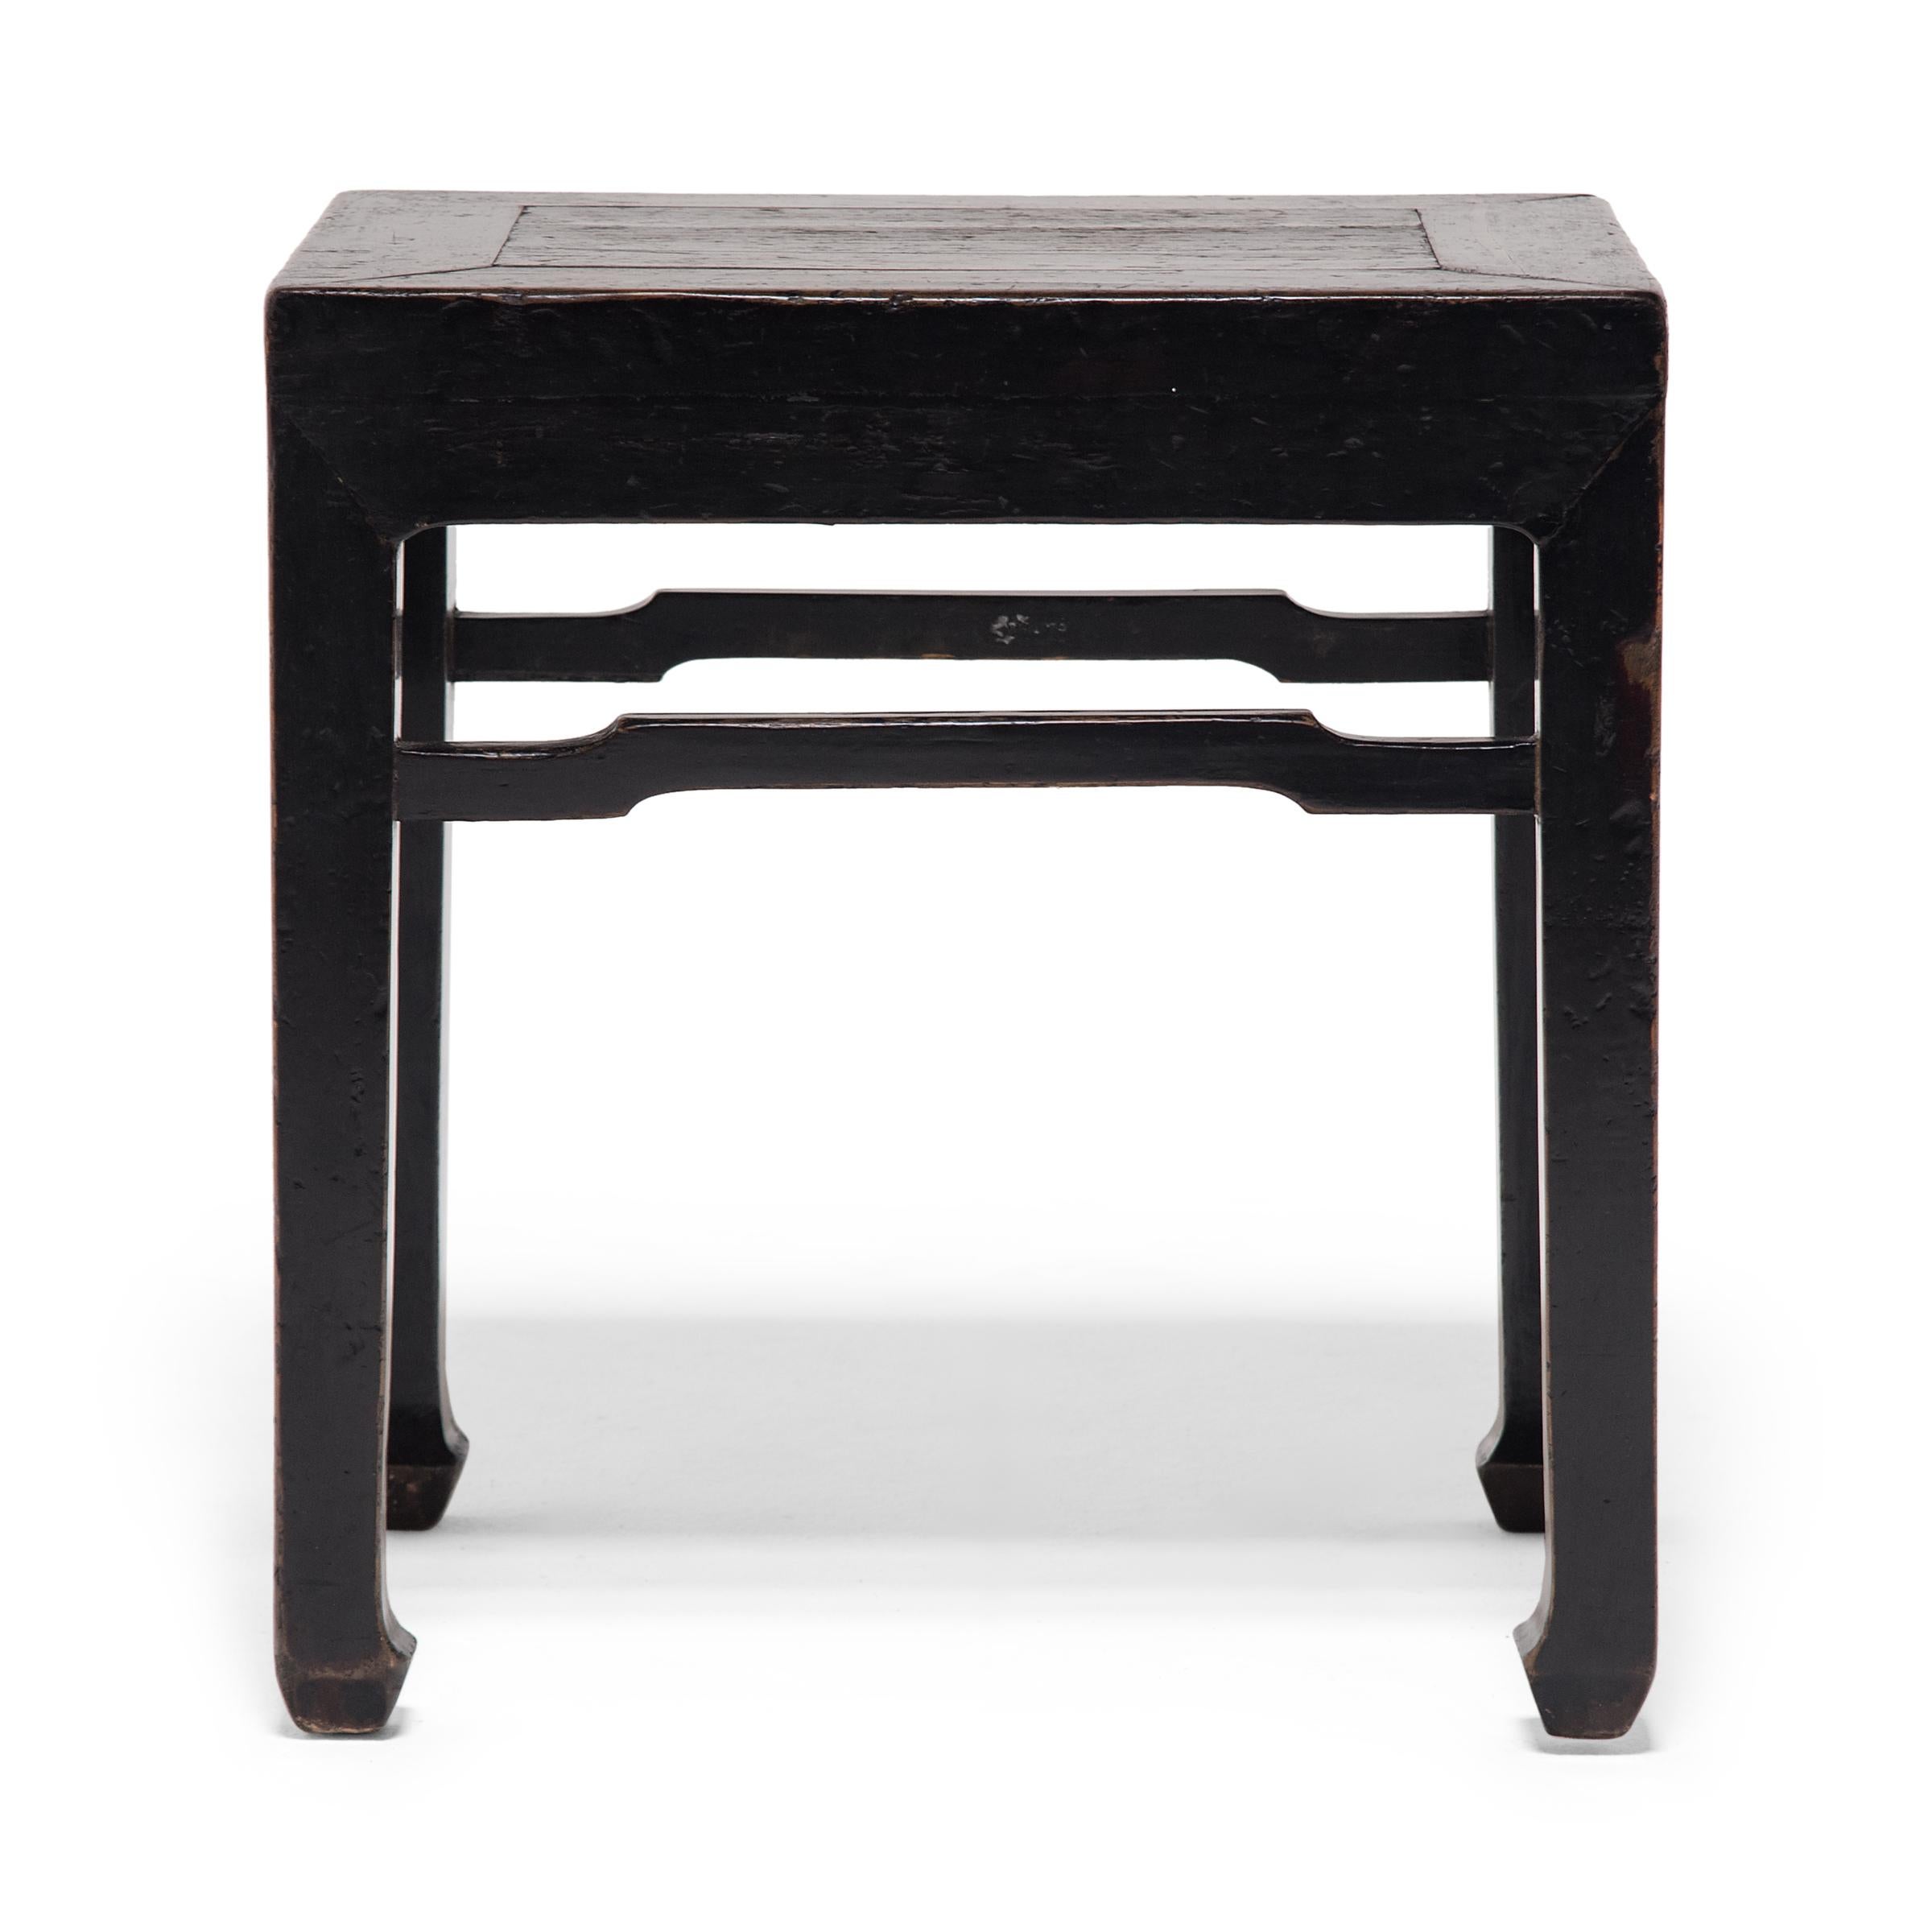 More portable than heavy chairs, stools have been a favored form of seating in Chinese culture for centuries and were used indoors and out at mealtimes and during social gatherings. This type of square stool is known as a fang deng, and doubles as a